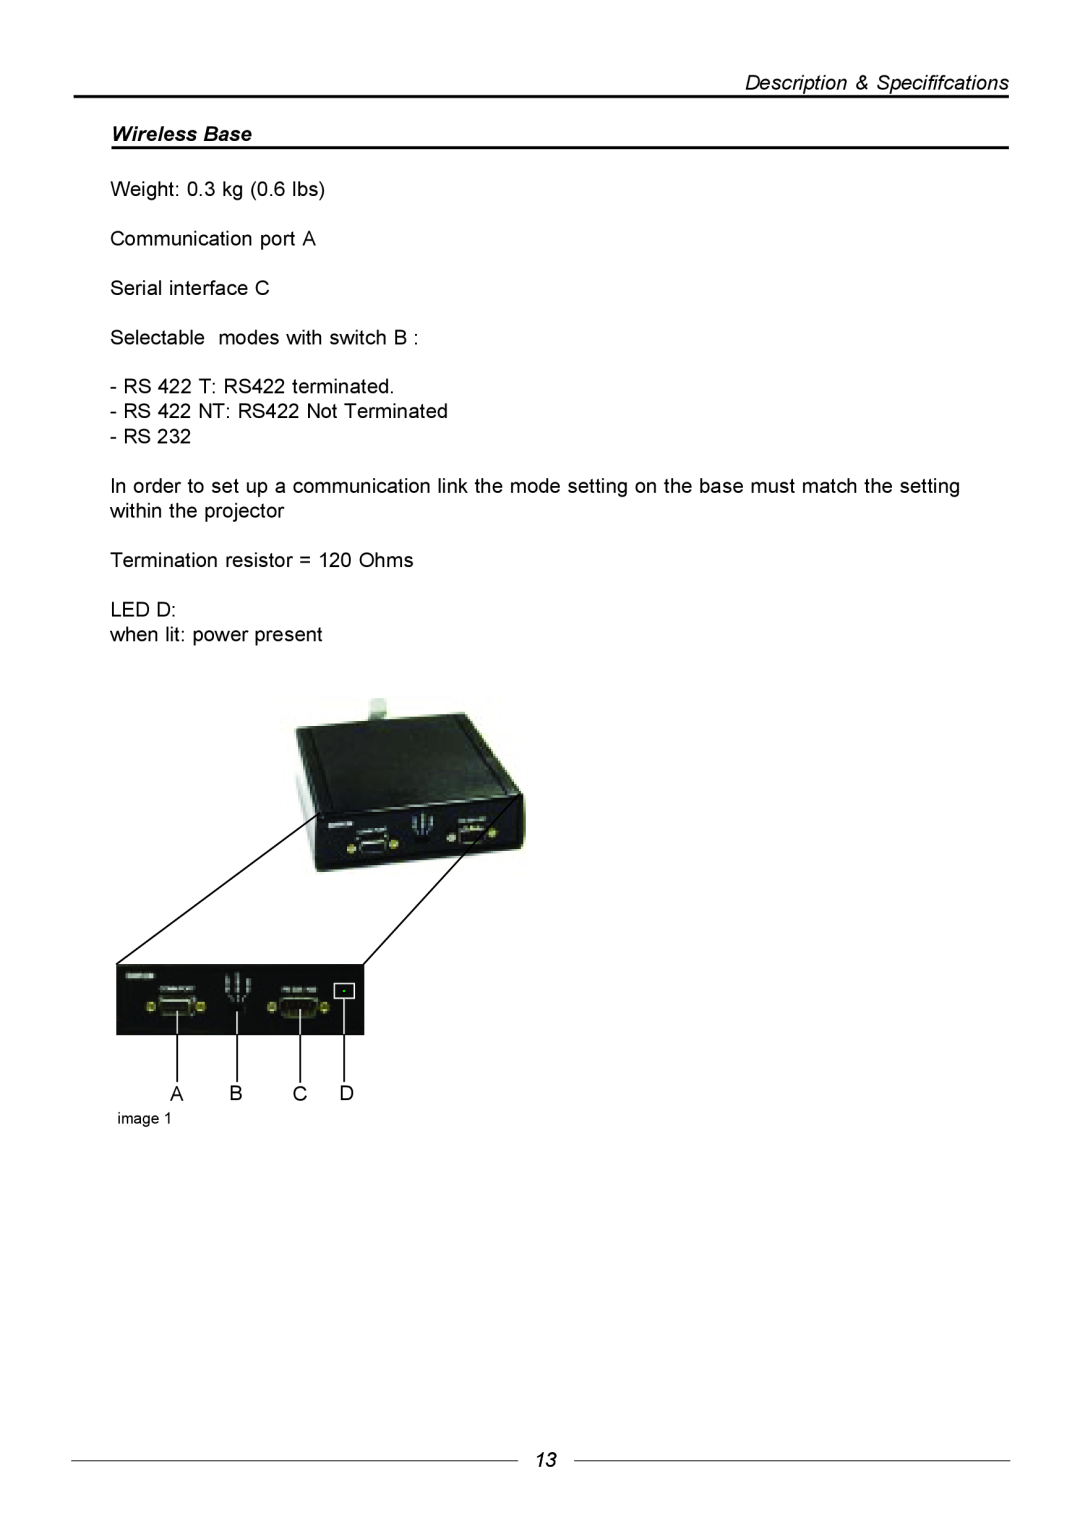 Barco R9840170 Description & Specififcations Wireless Base, Weight 0.3 kg 0.6 lbs Communication port A Serial interface C 